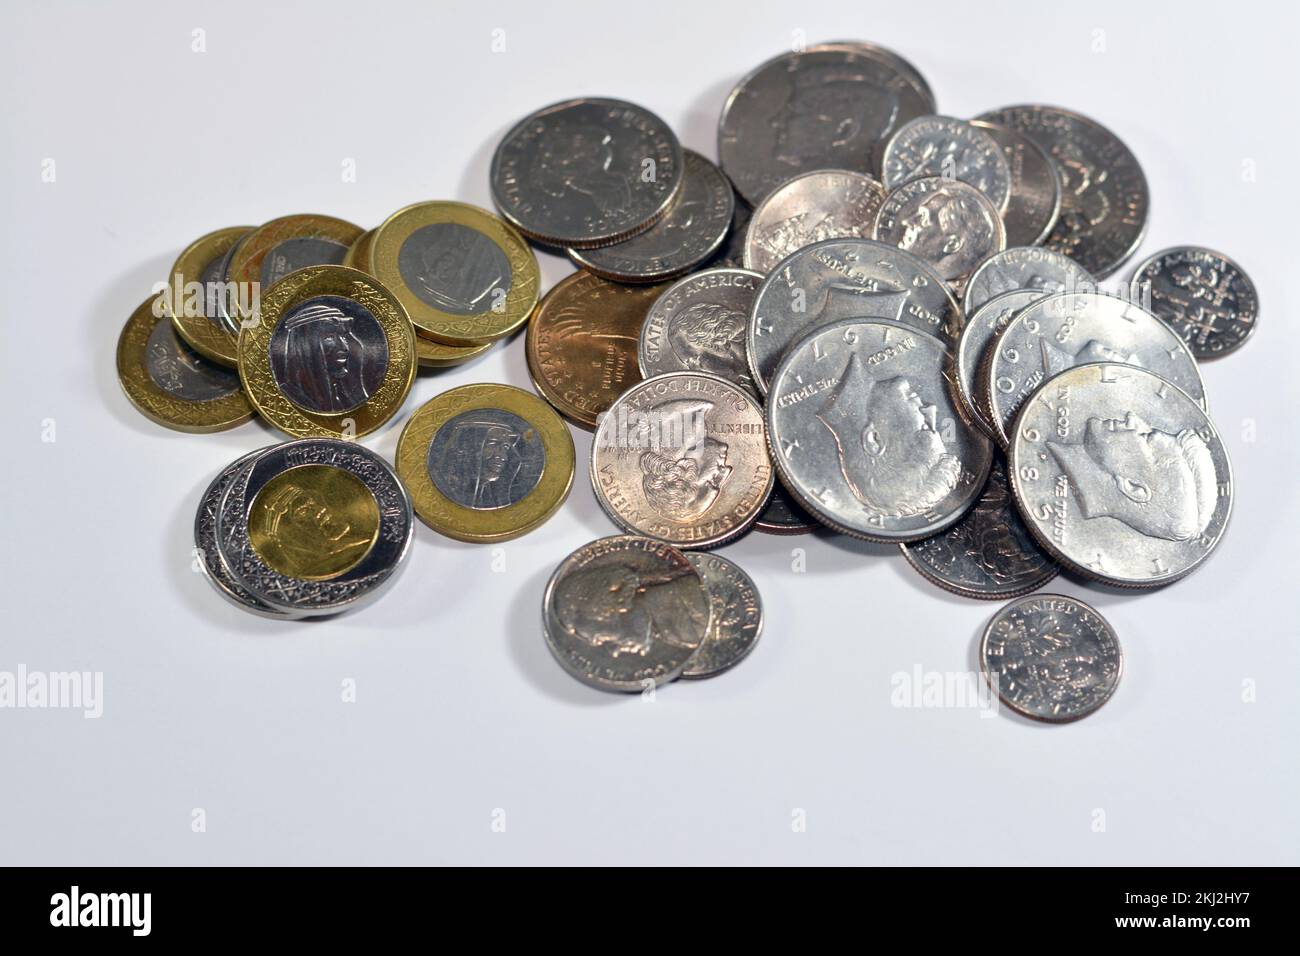 Pile of Saudi and American coins money of 1, 2 SAR one and two riyals, half a dollar 50 cents, 25 cents quarters, dime 10 cents and five cents, USA an Stock Photo